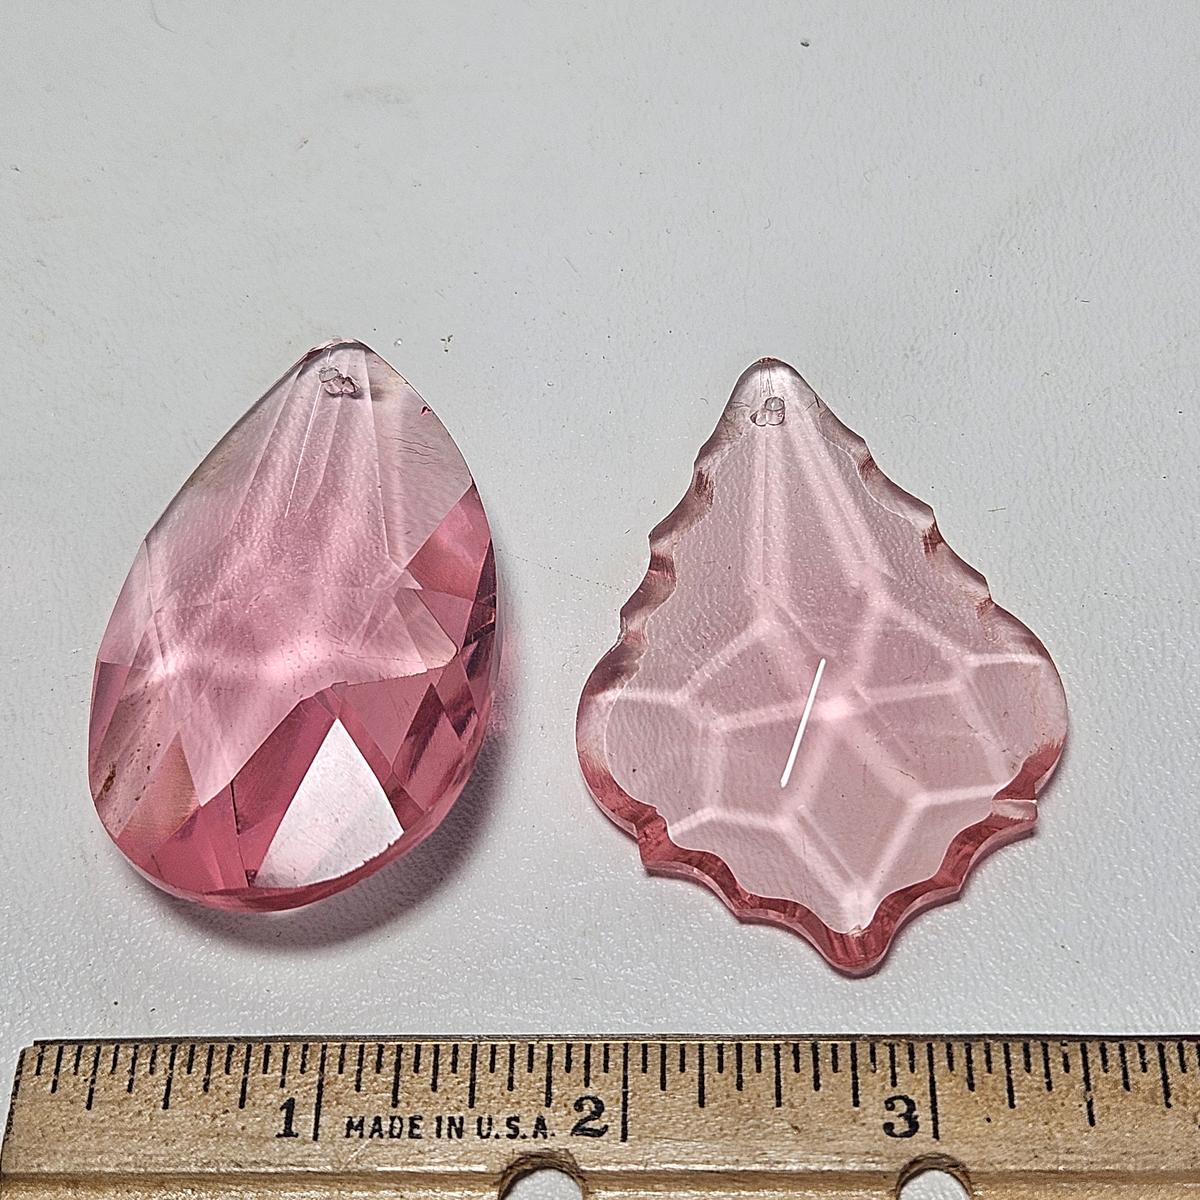 Lot of 2 Large Pink Crystals